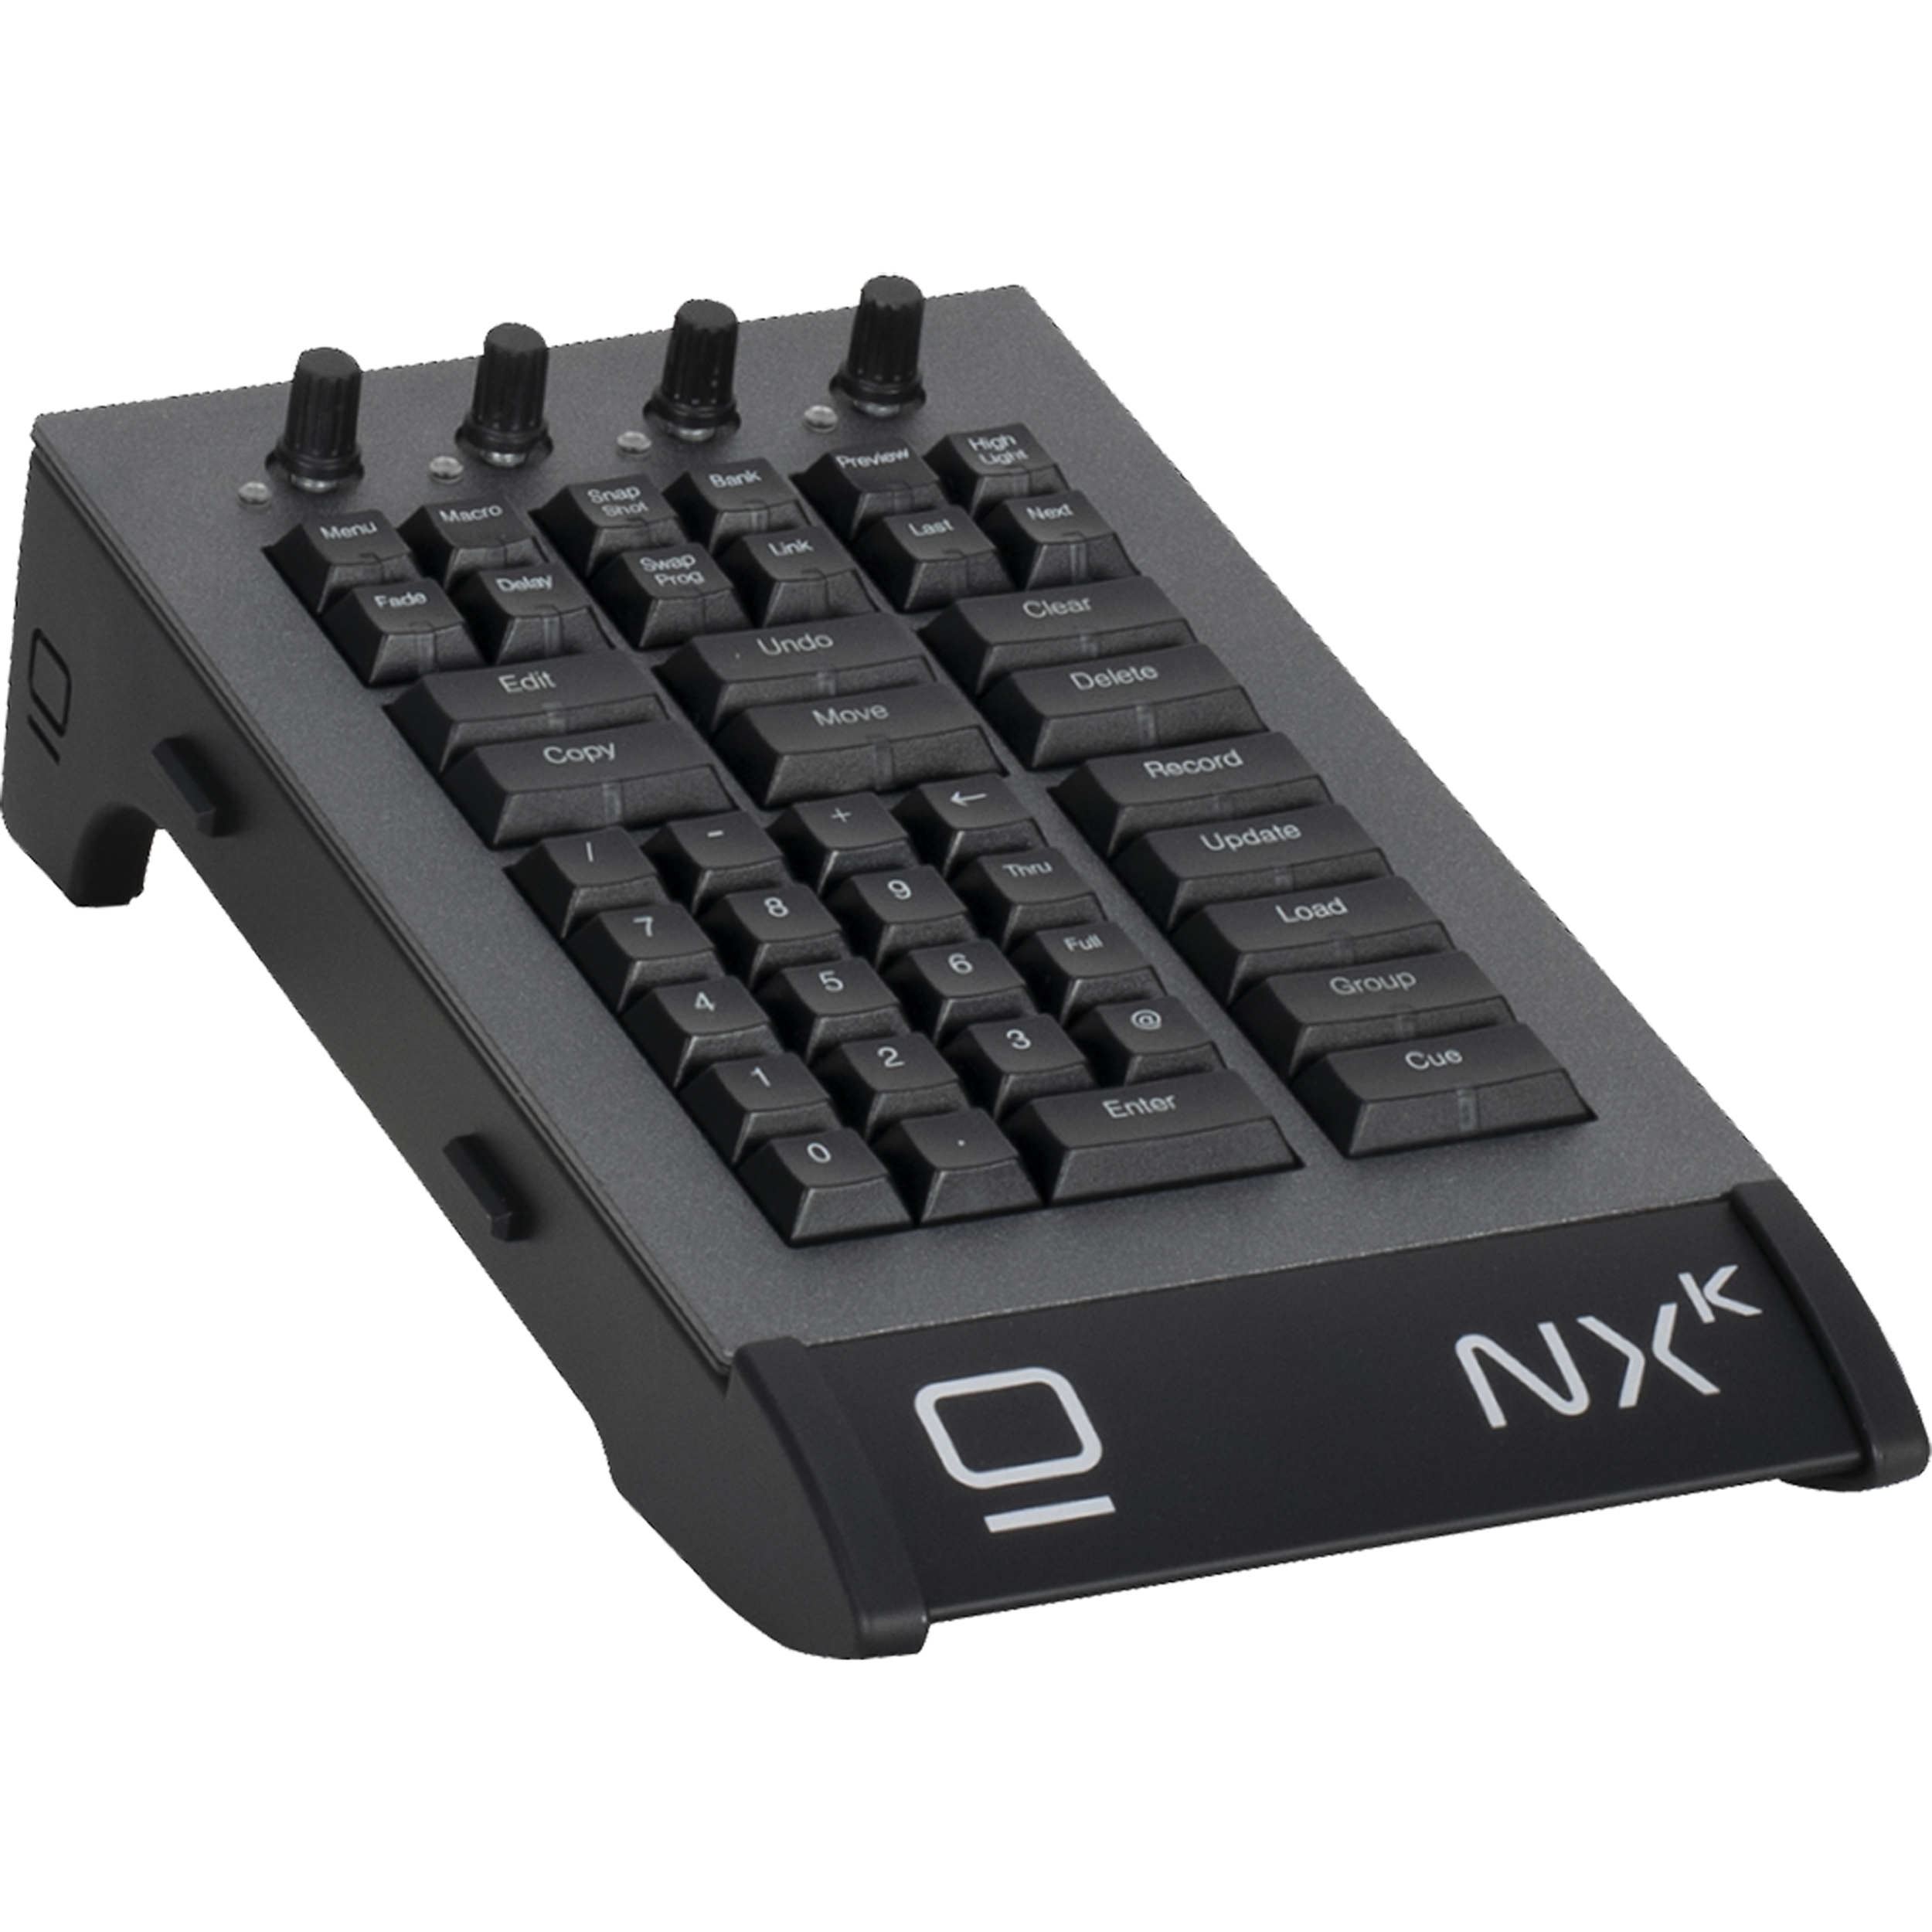 Obsidian NX1 Lighting Controller with NX K Keypad tourPack with BYFP ipCase